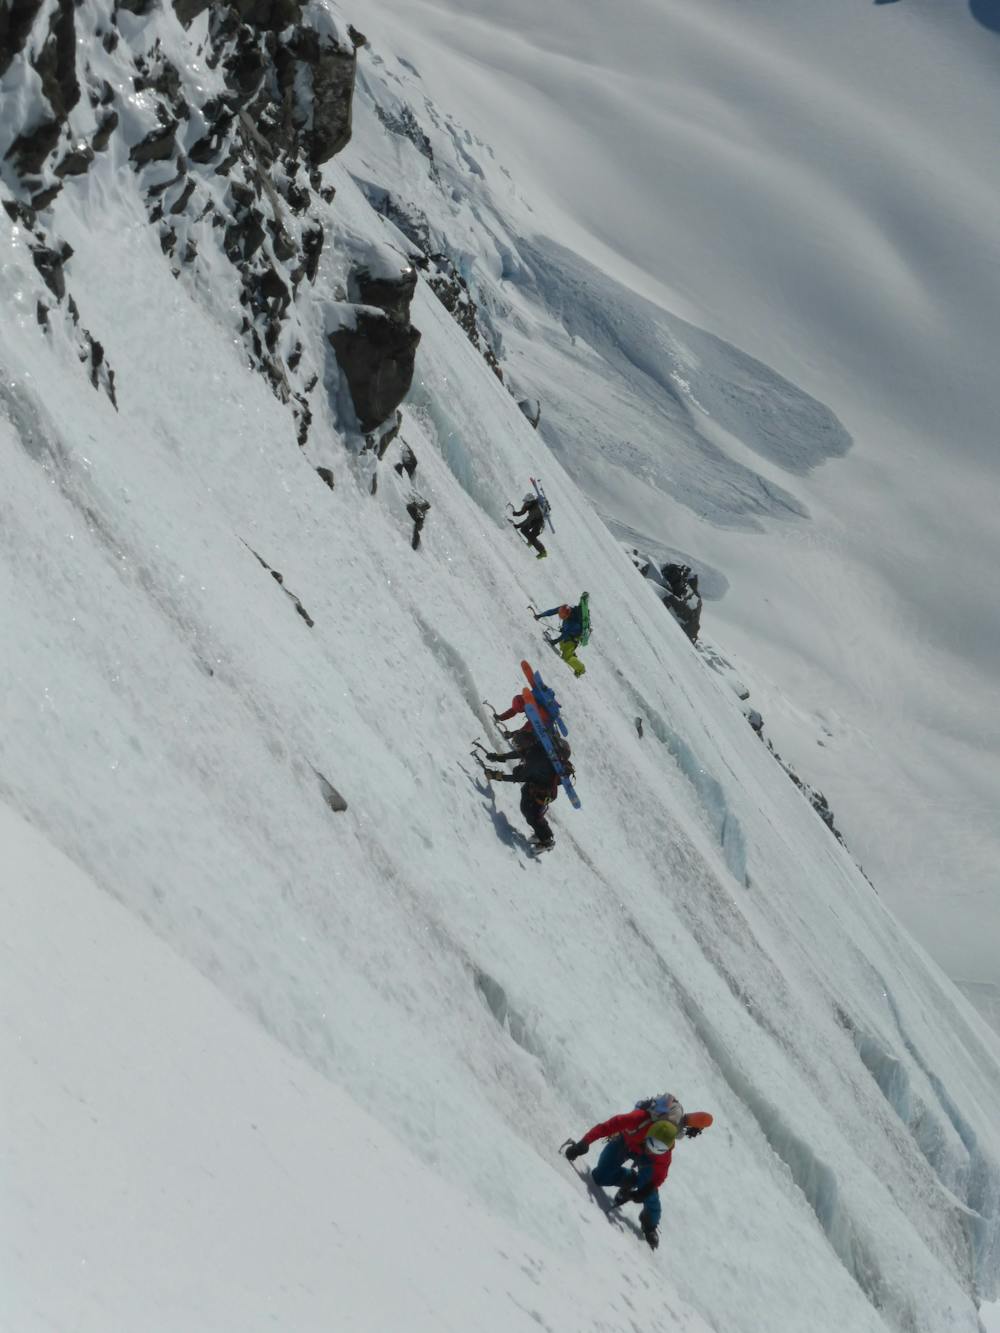 Traversing exposed ice after a route finding error